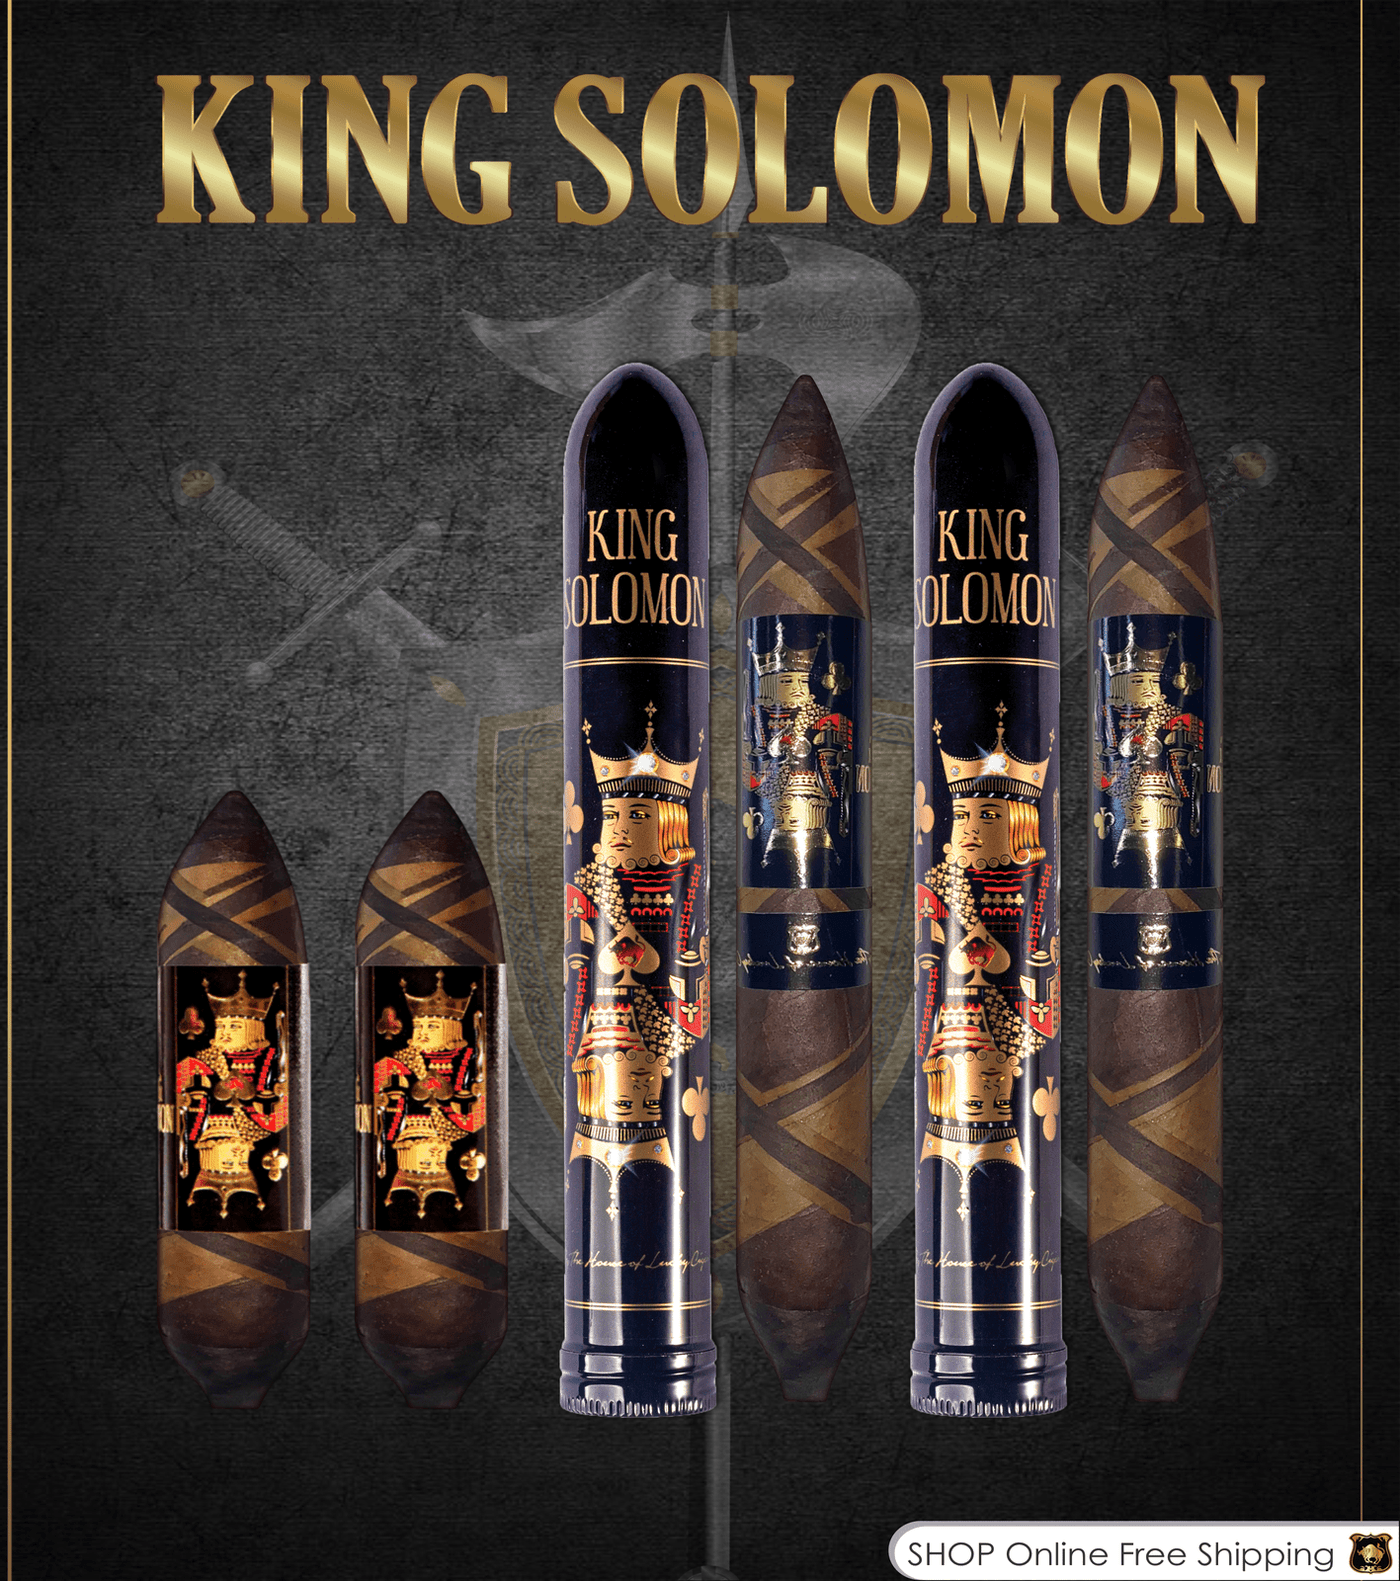 From The King Solomon Series: Set of 2 Solomon 7x60 and 2 Wisdom 4x60 Cigars 